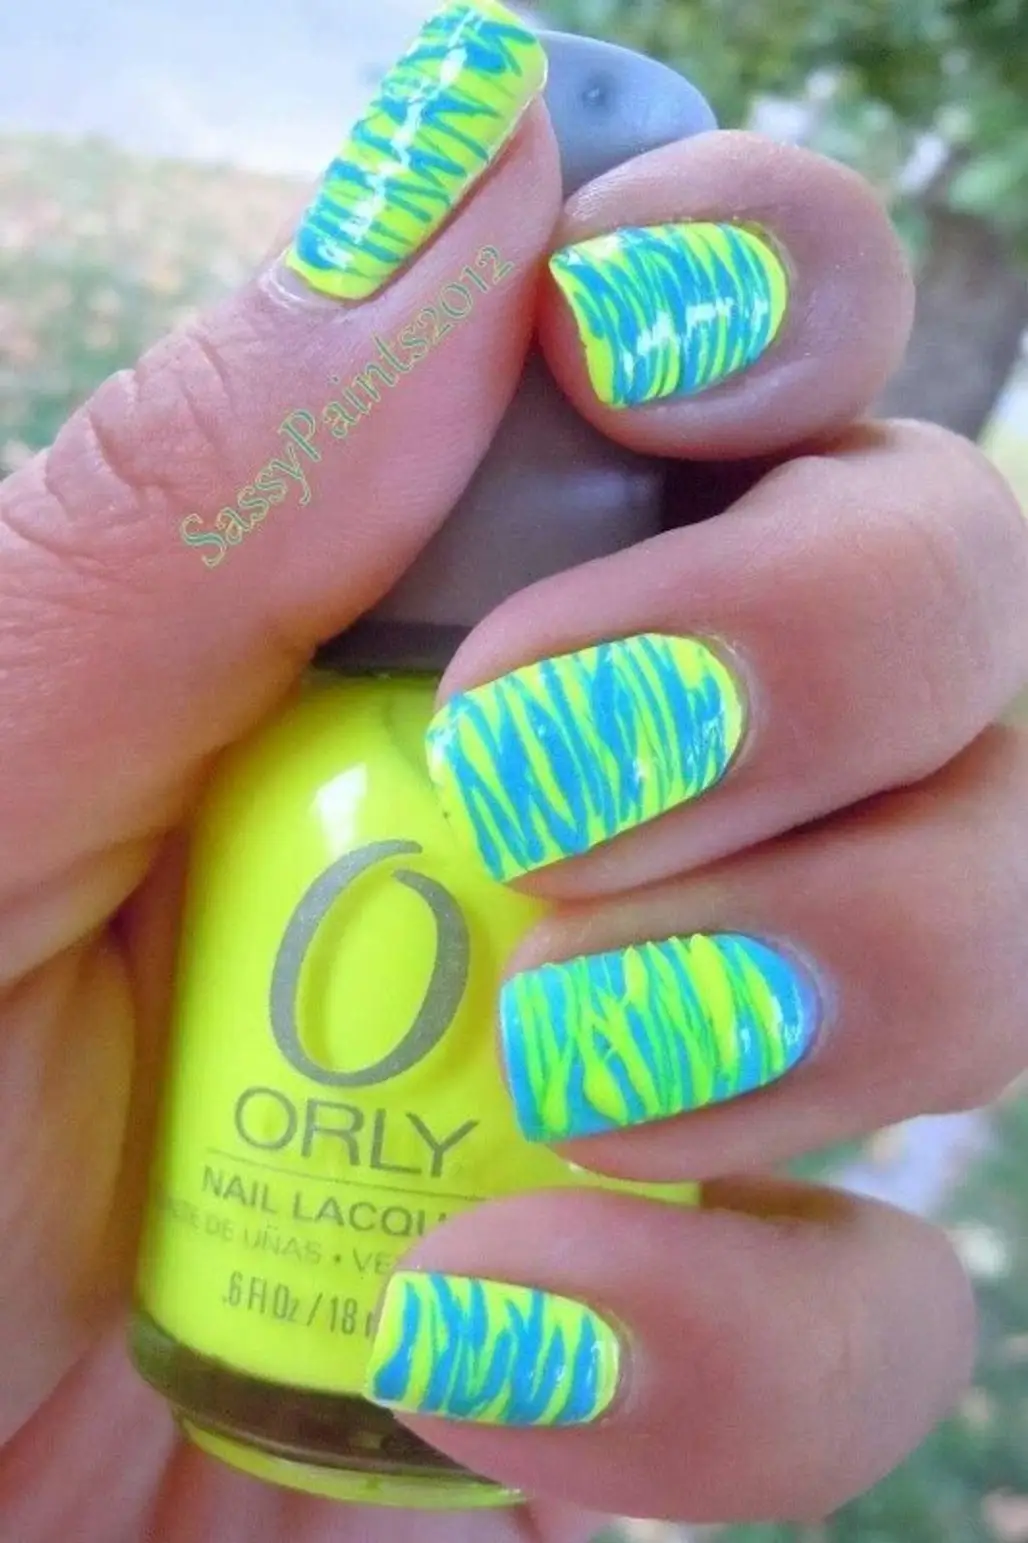 color,nail,finger,green,yellow,